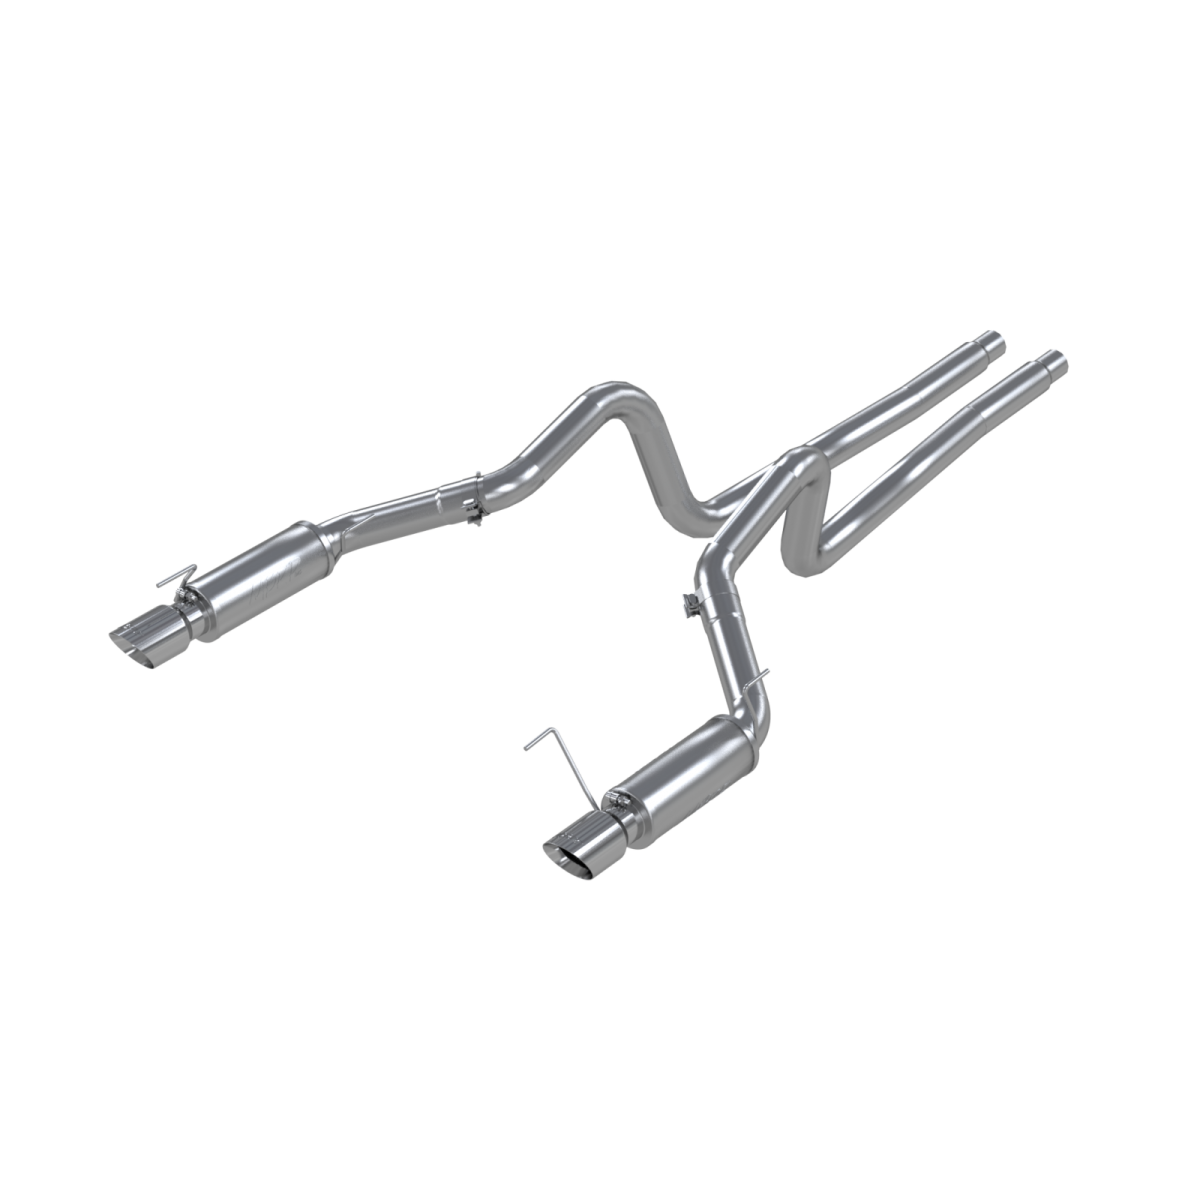 MBRP - MBRP Dual Mufflers Cat Back Exhaust System Dual Split Rear Race Version T409 Stainless Steel 4 Inch Tips For 05-09 Ford Mustang GT 4.6L 07-10 Ford Shelby GT500 S7270409